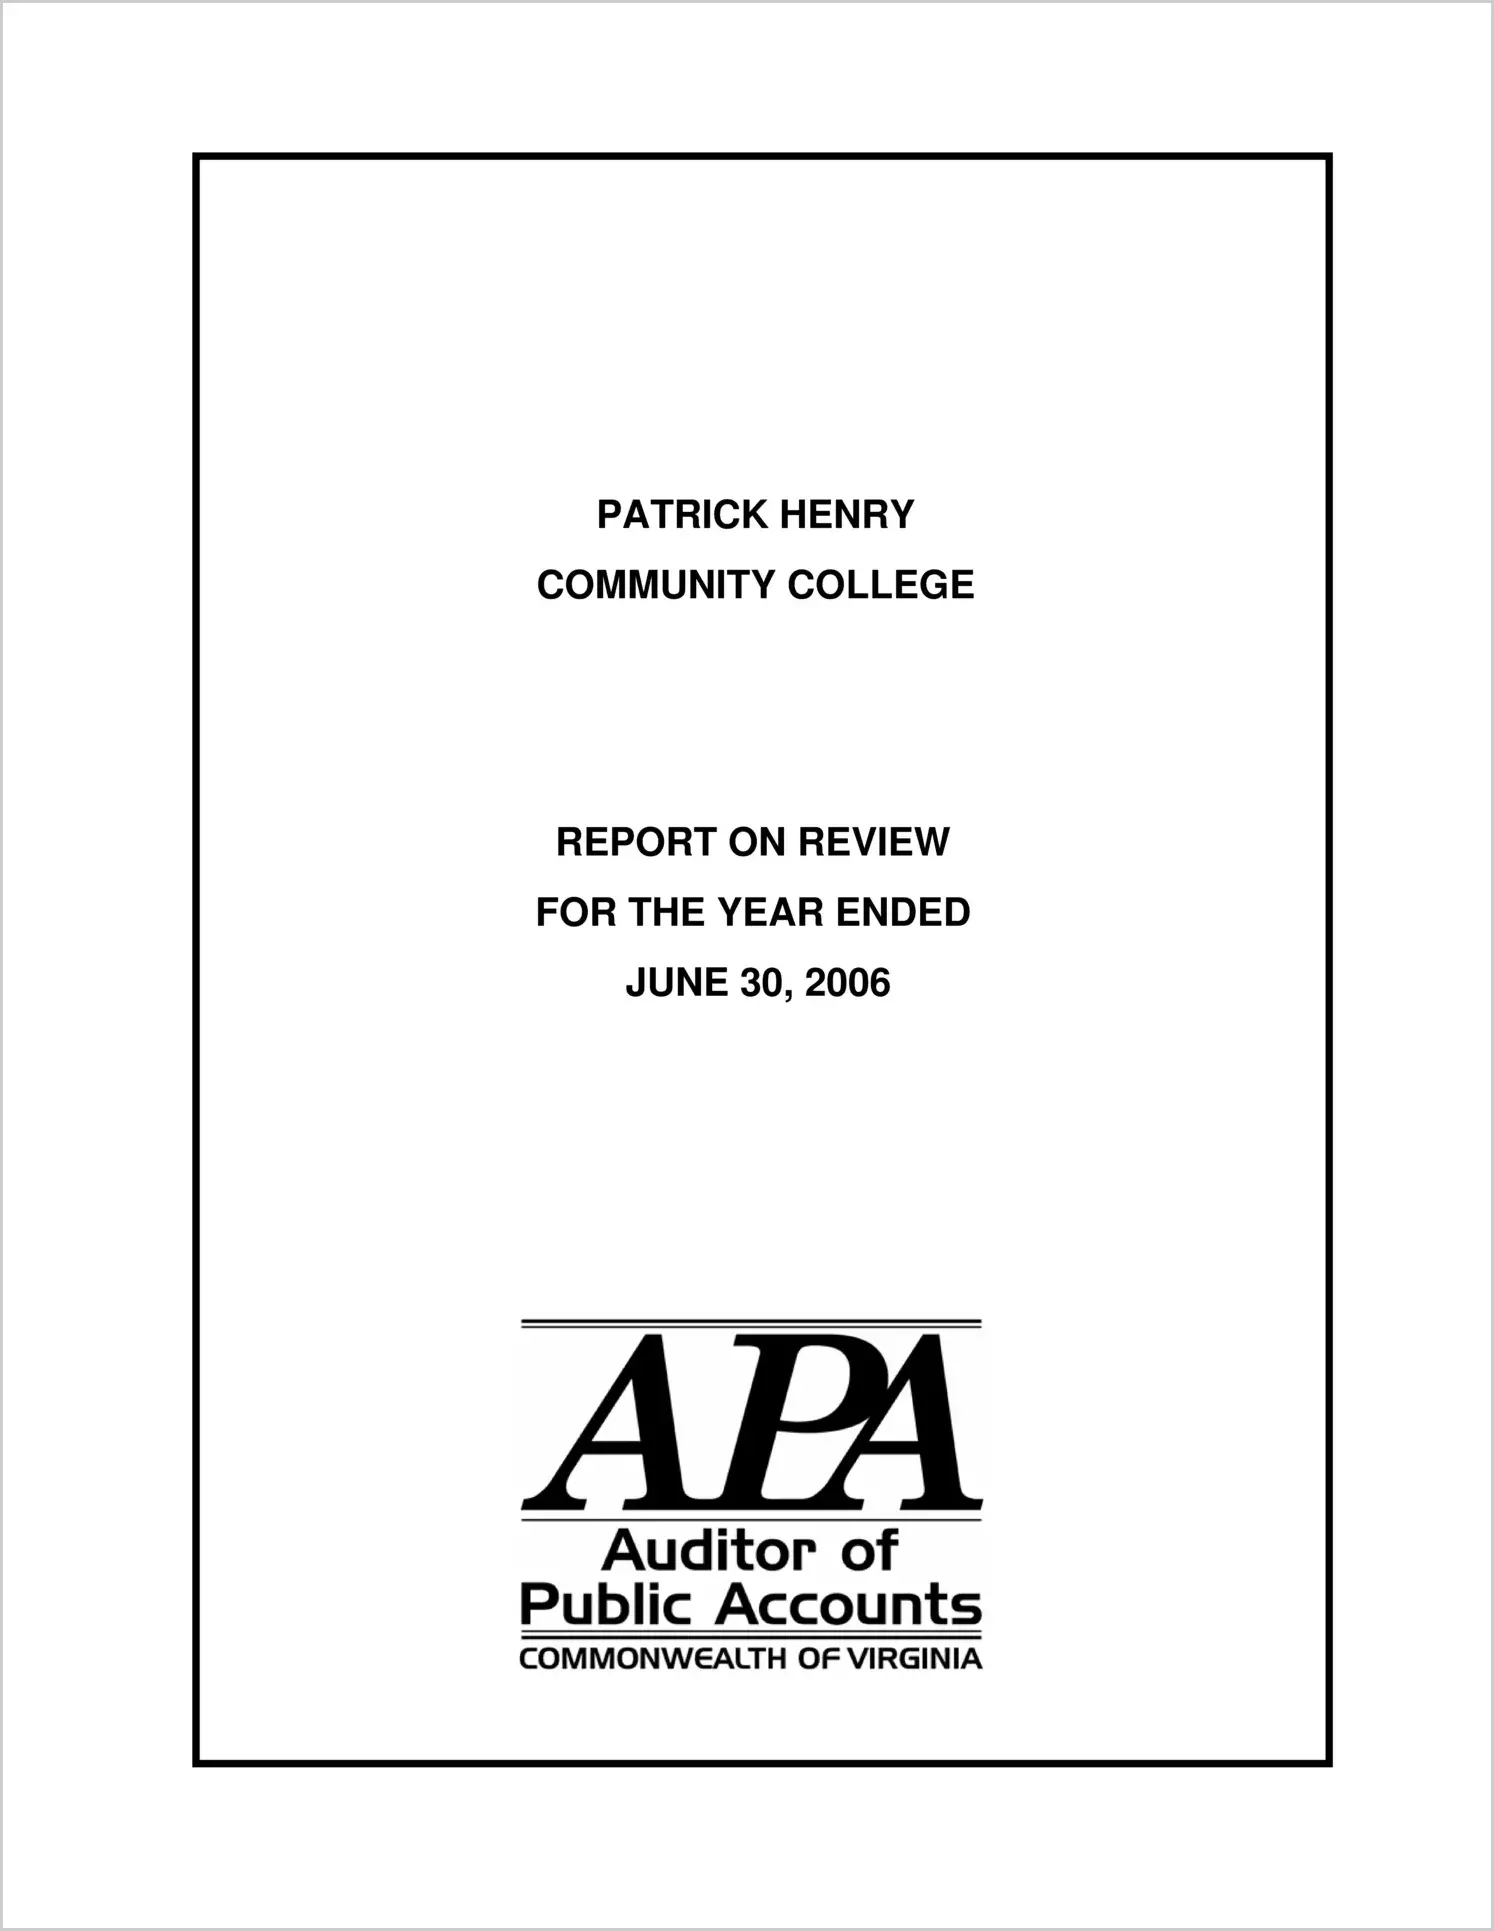 Patrick Henry Community College Report on review for the year ended June 30, 2006